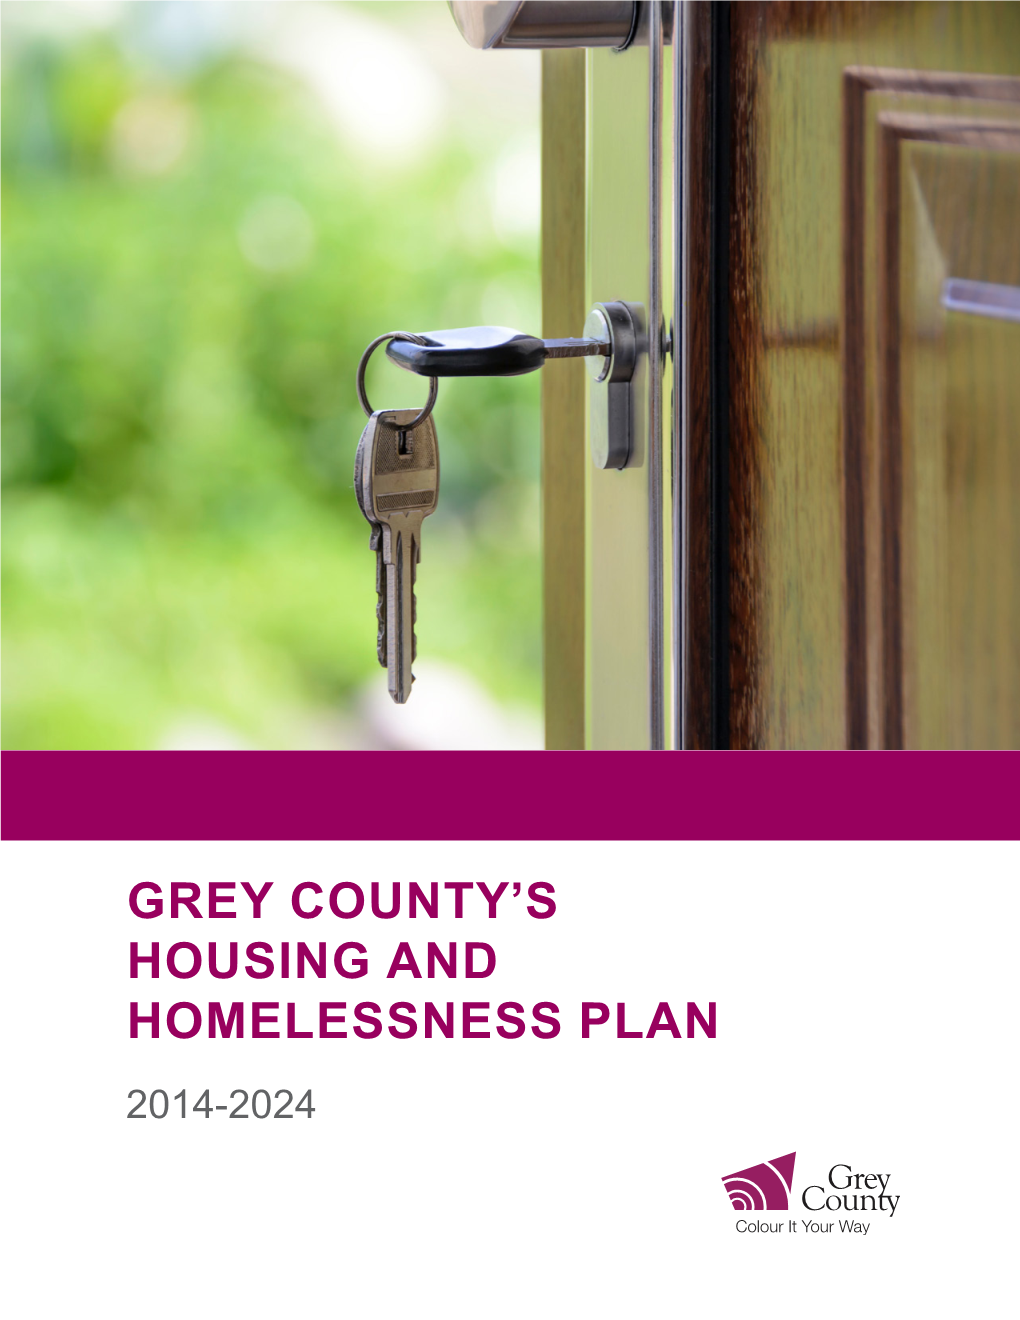 Housing and Homelessness Plan 2014-2024 Table of Contents